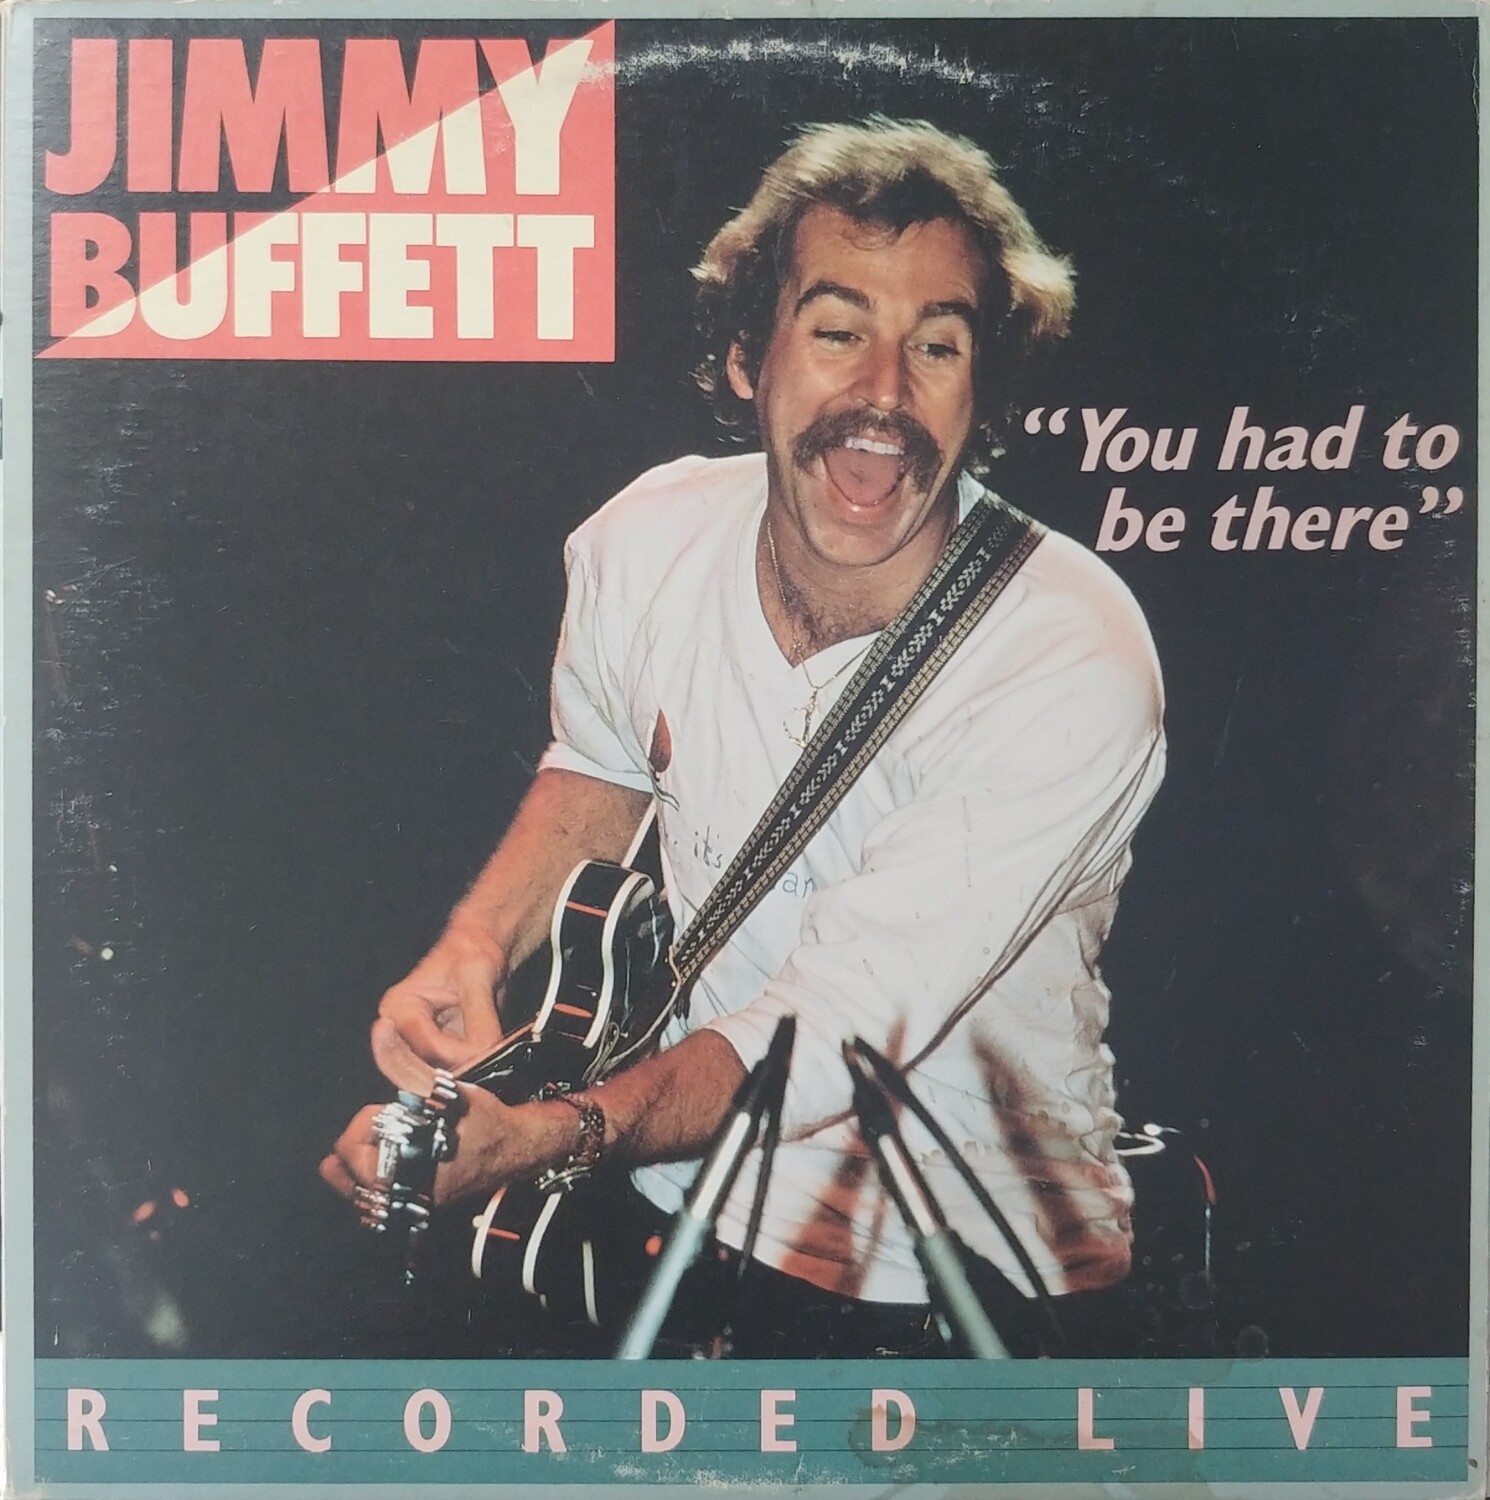 Jimmy Buffett - You had to be there